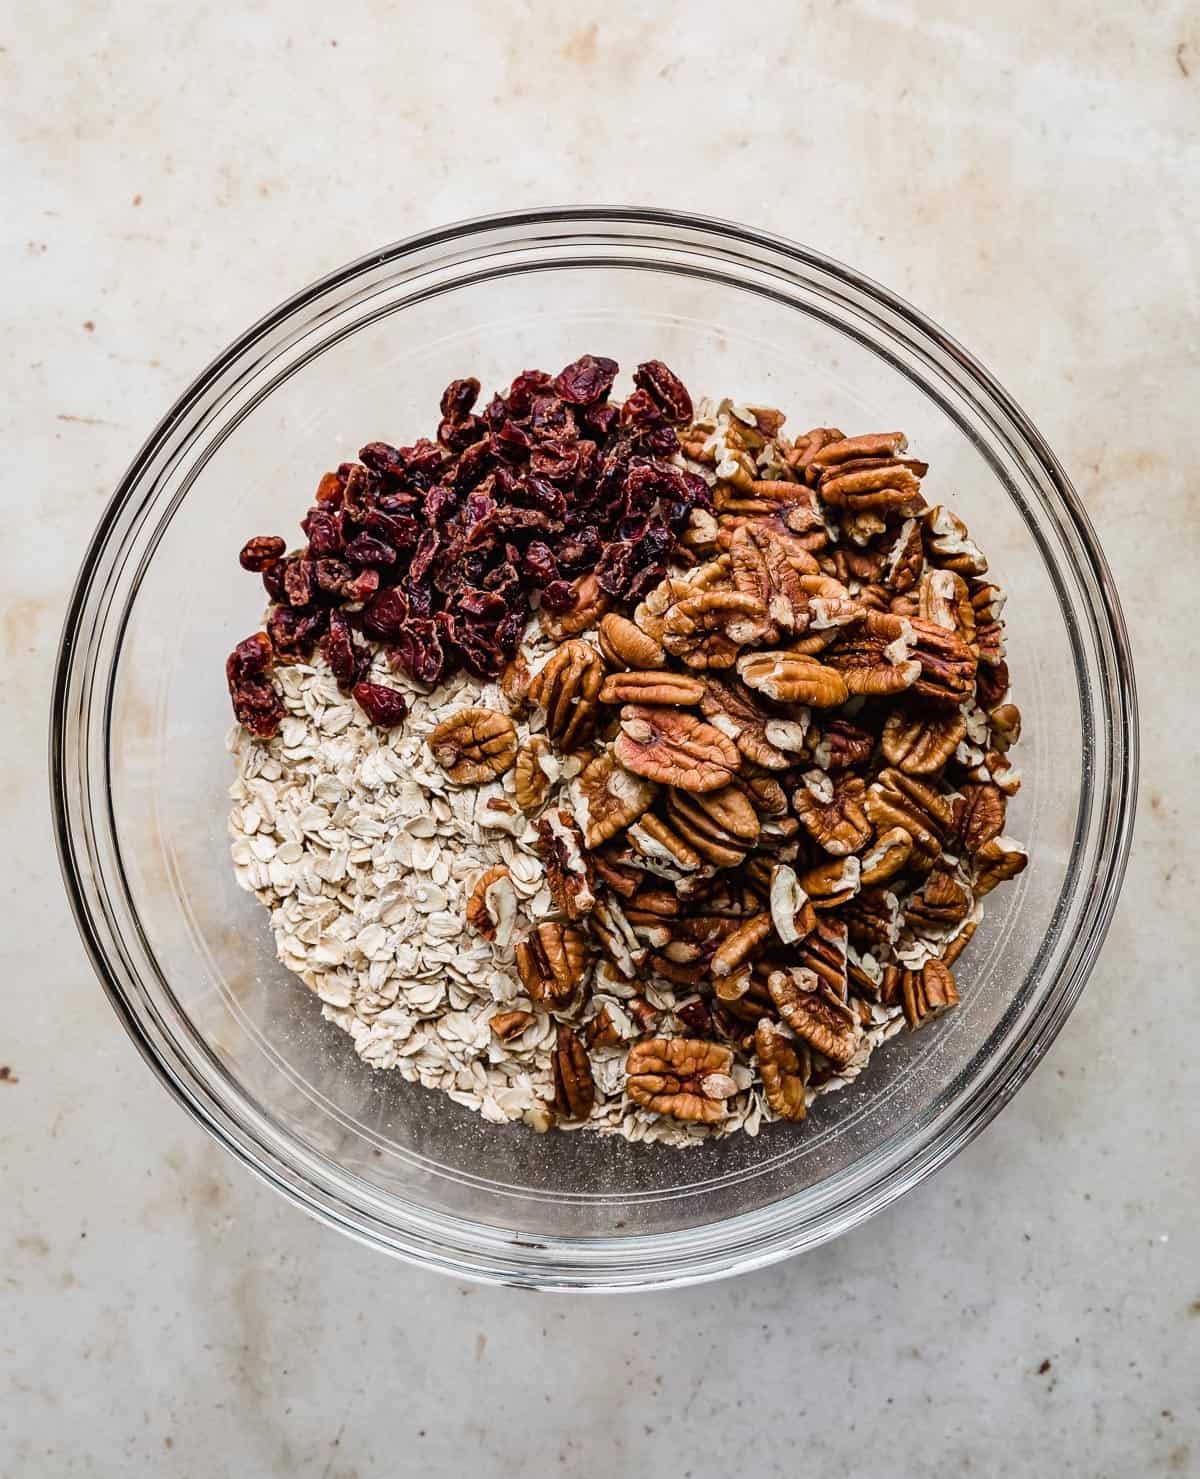 A glass bowl with Gingerbread Granola ingredients in it: pecans, dried cranberries, oats.